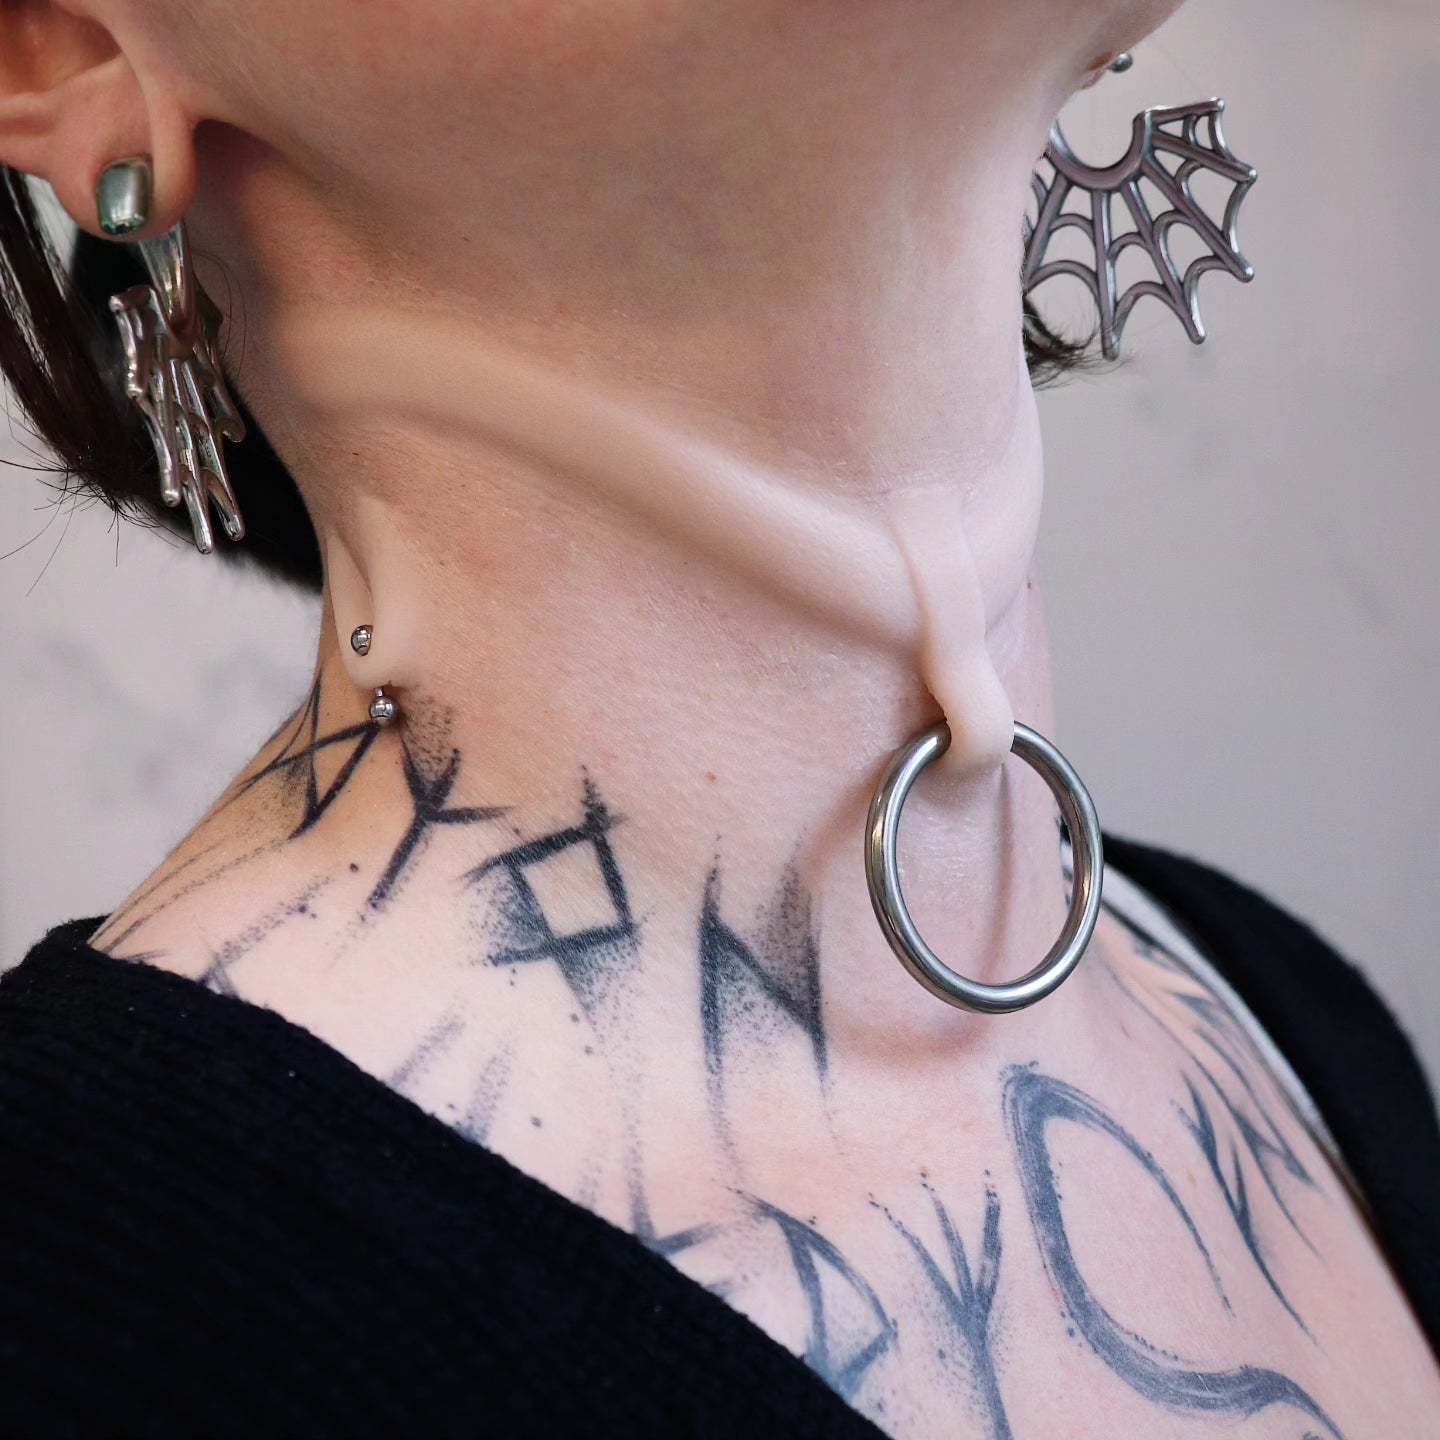 Woman's neck with stretched piercing and subdermal choker prosthetic